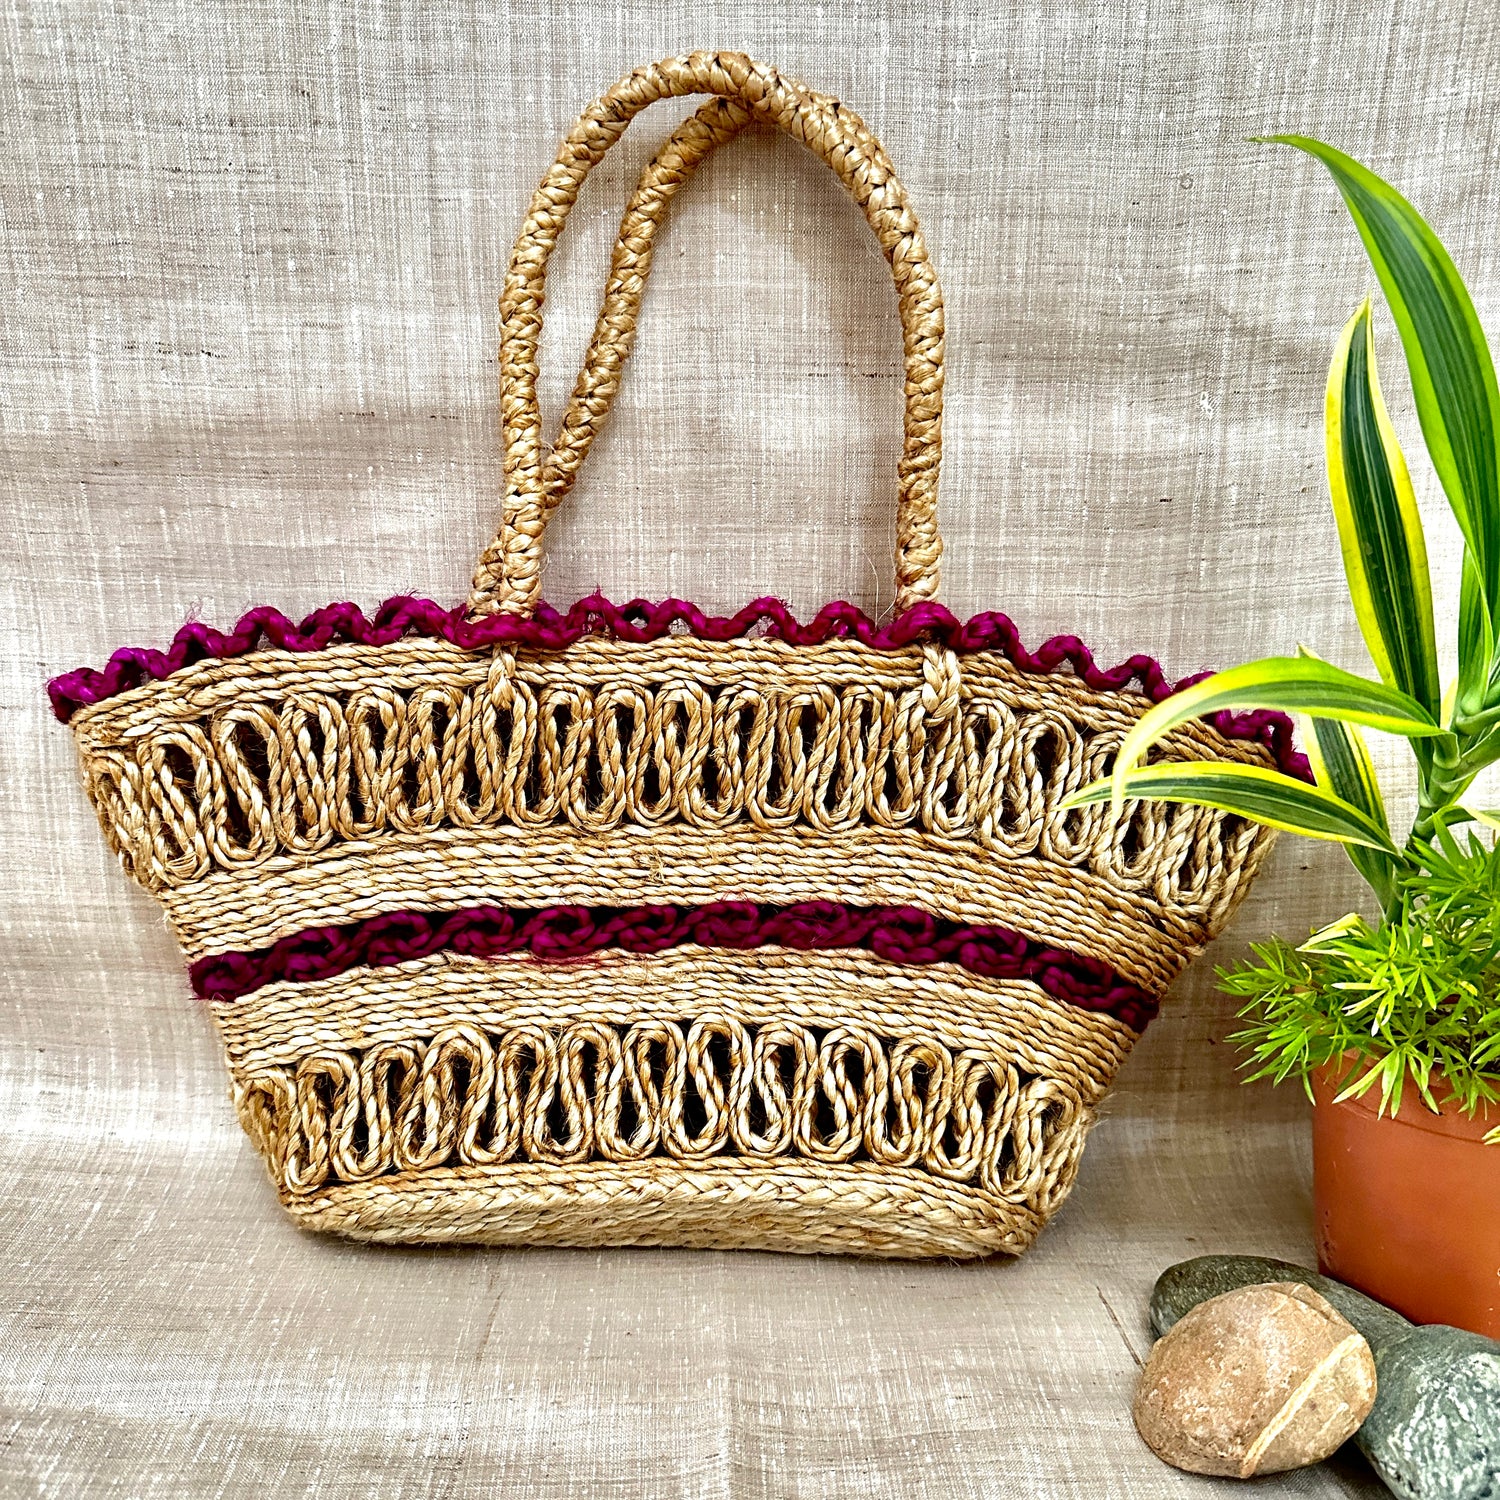 Natural Jute products